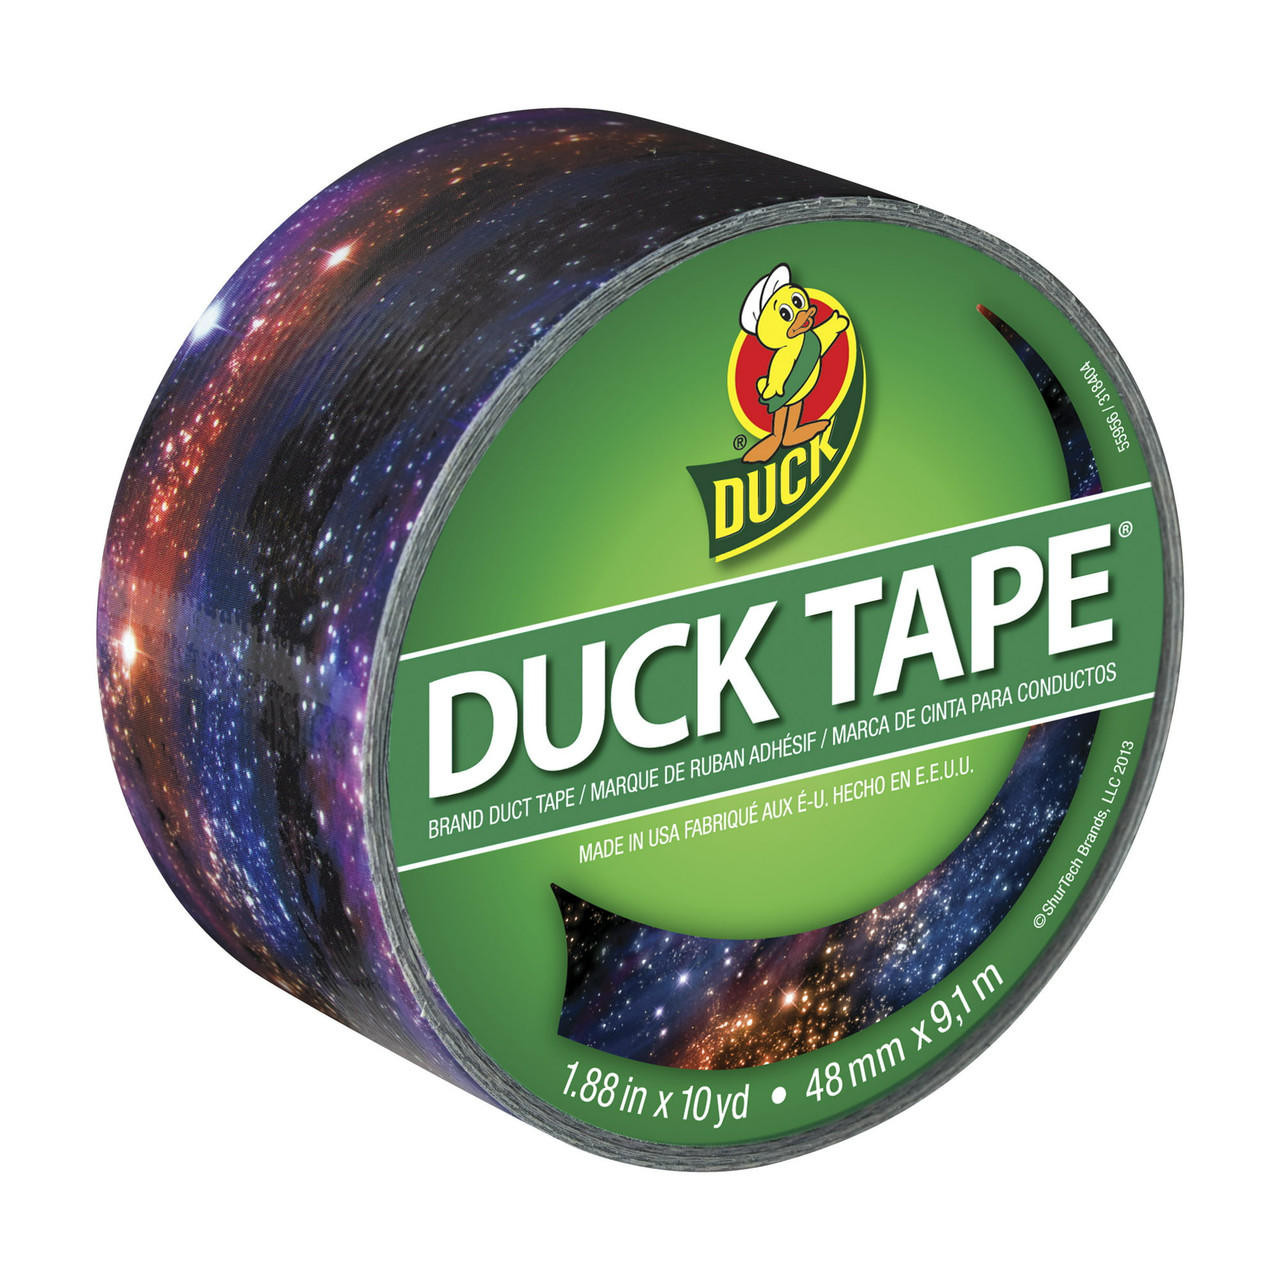 Duck Tape Patterned Duck Tape, 1.88 x 10 yds., Rainbow